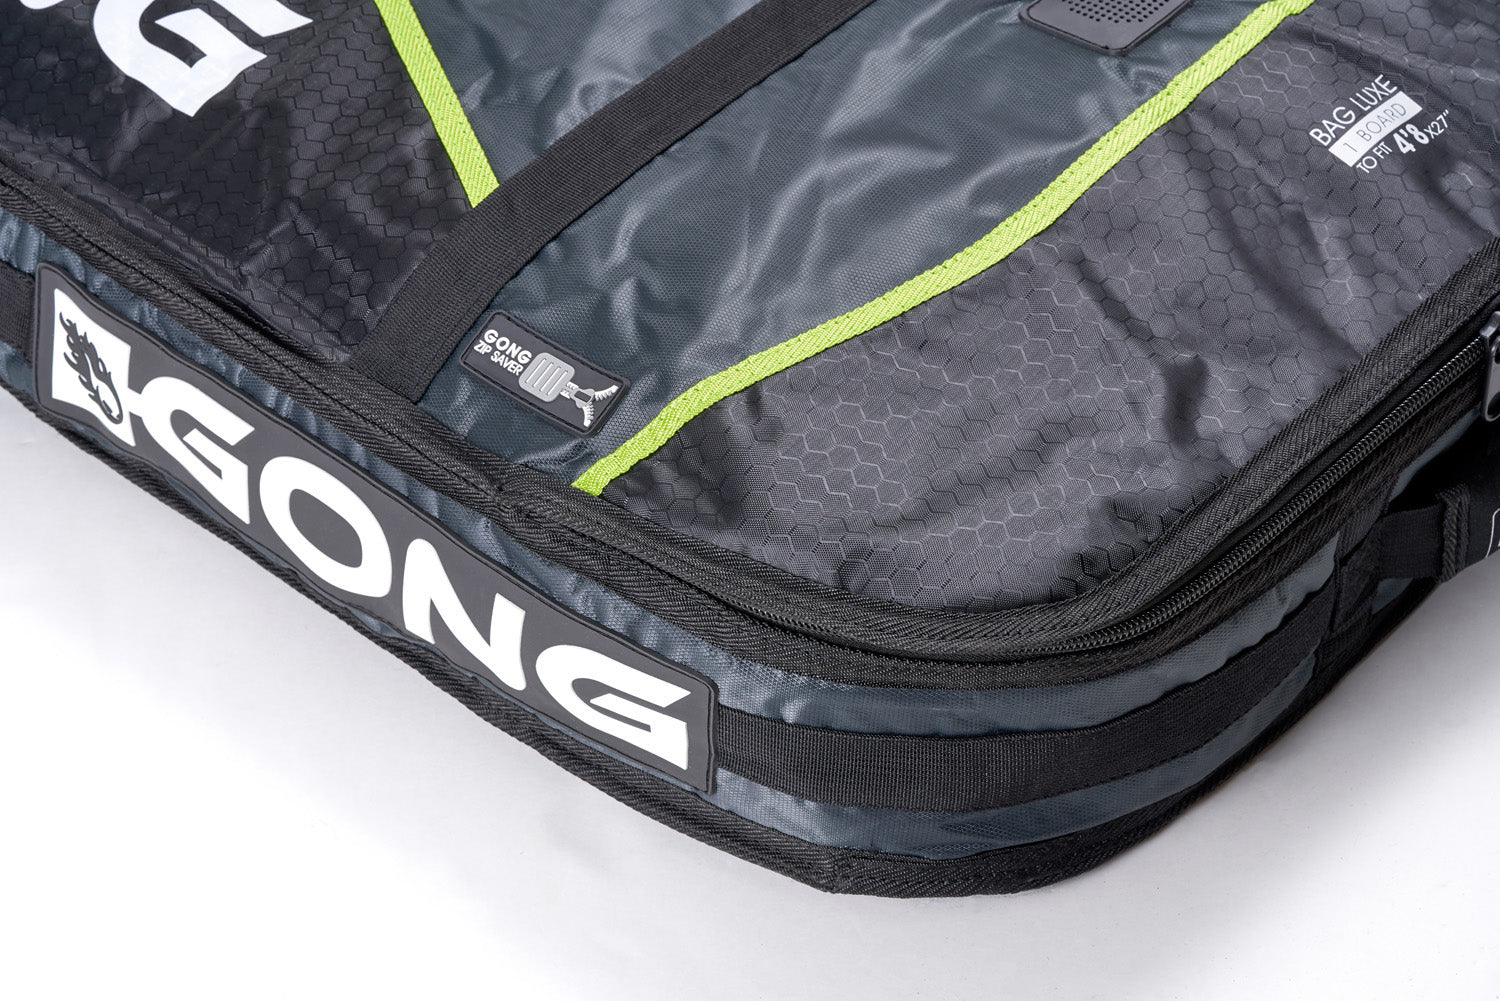 GONG | SUP Luxe Bag